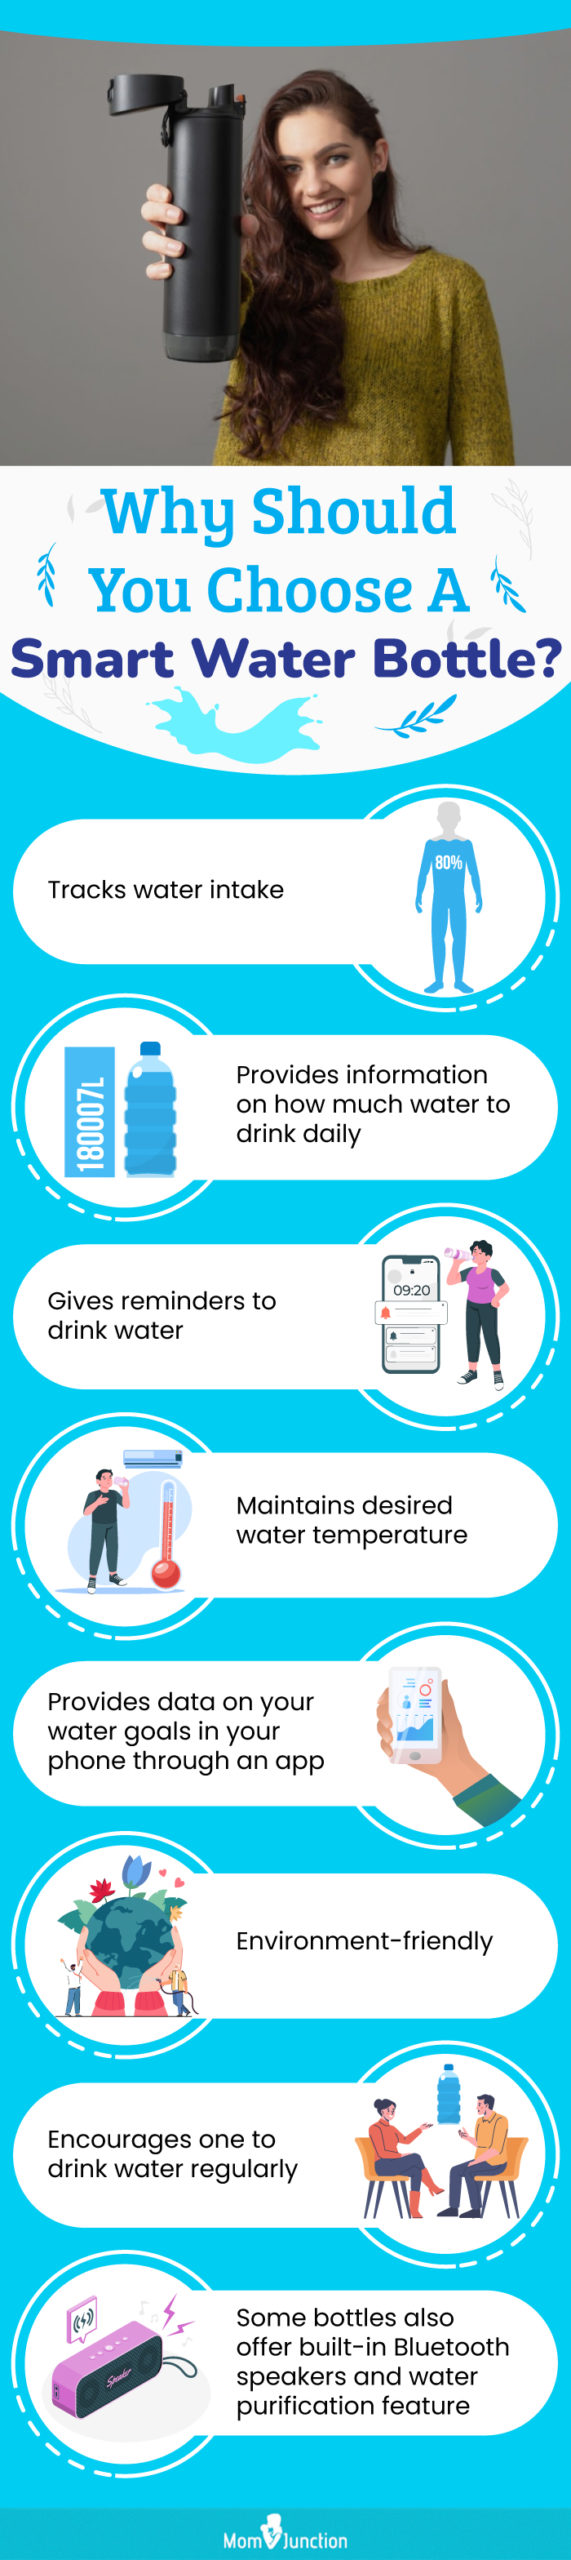 Why Should You Choose A Smart Water Bottle (infographic)